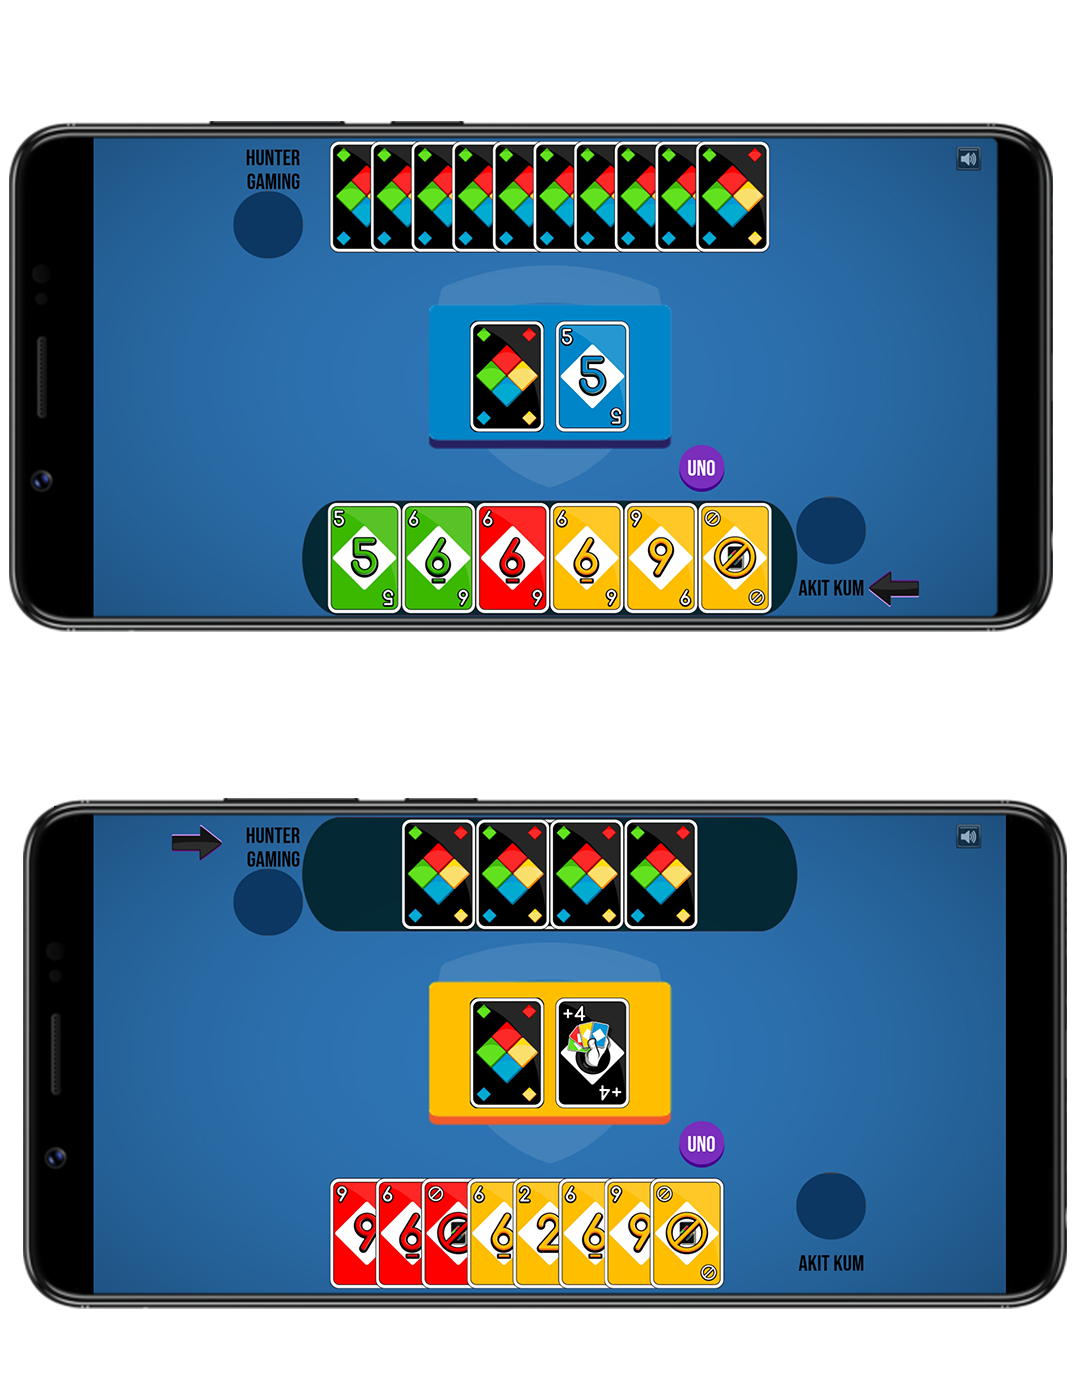 How to develop a game app like UNO & how much does it costs?